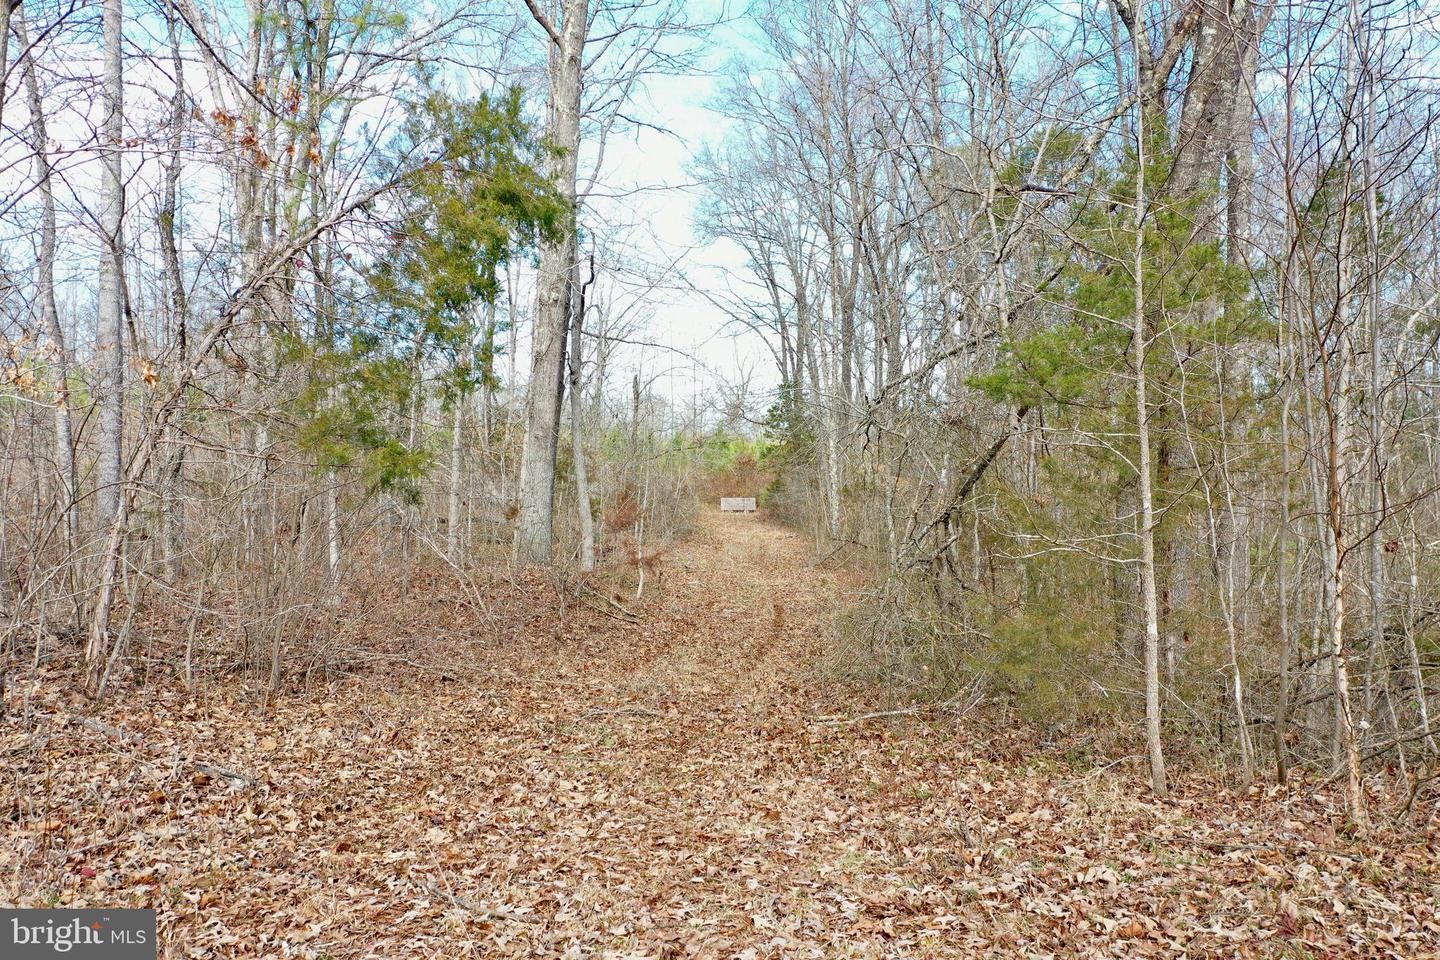 39. Tbd Ancient Acres Rd